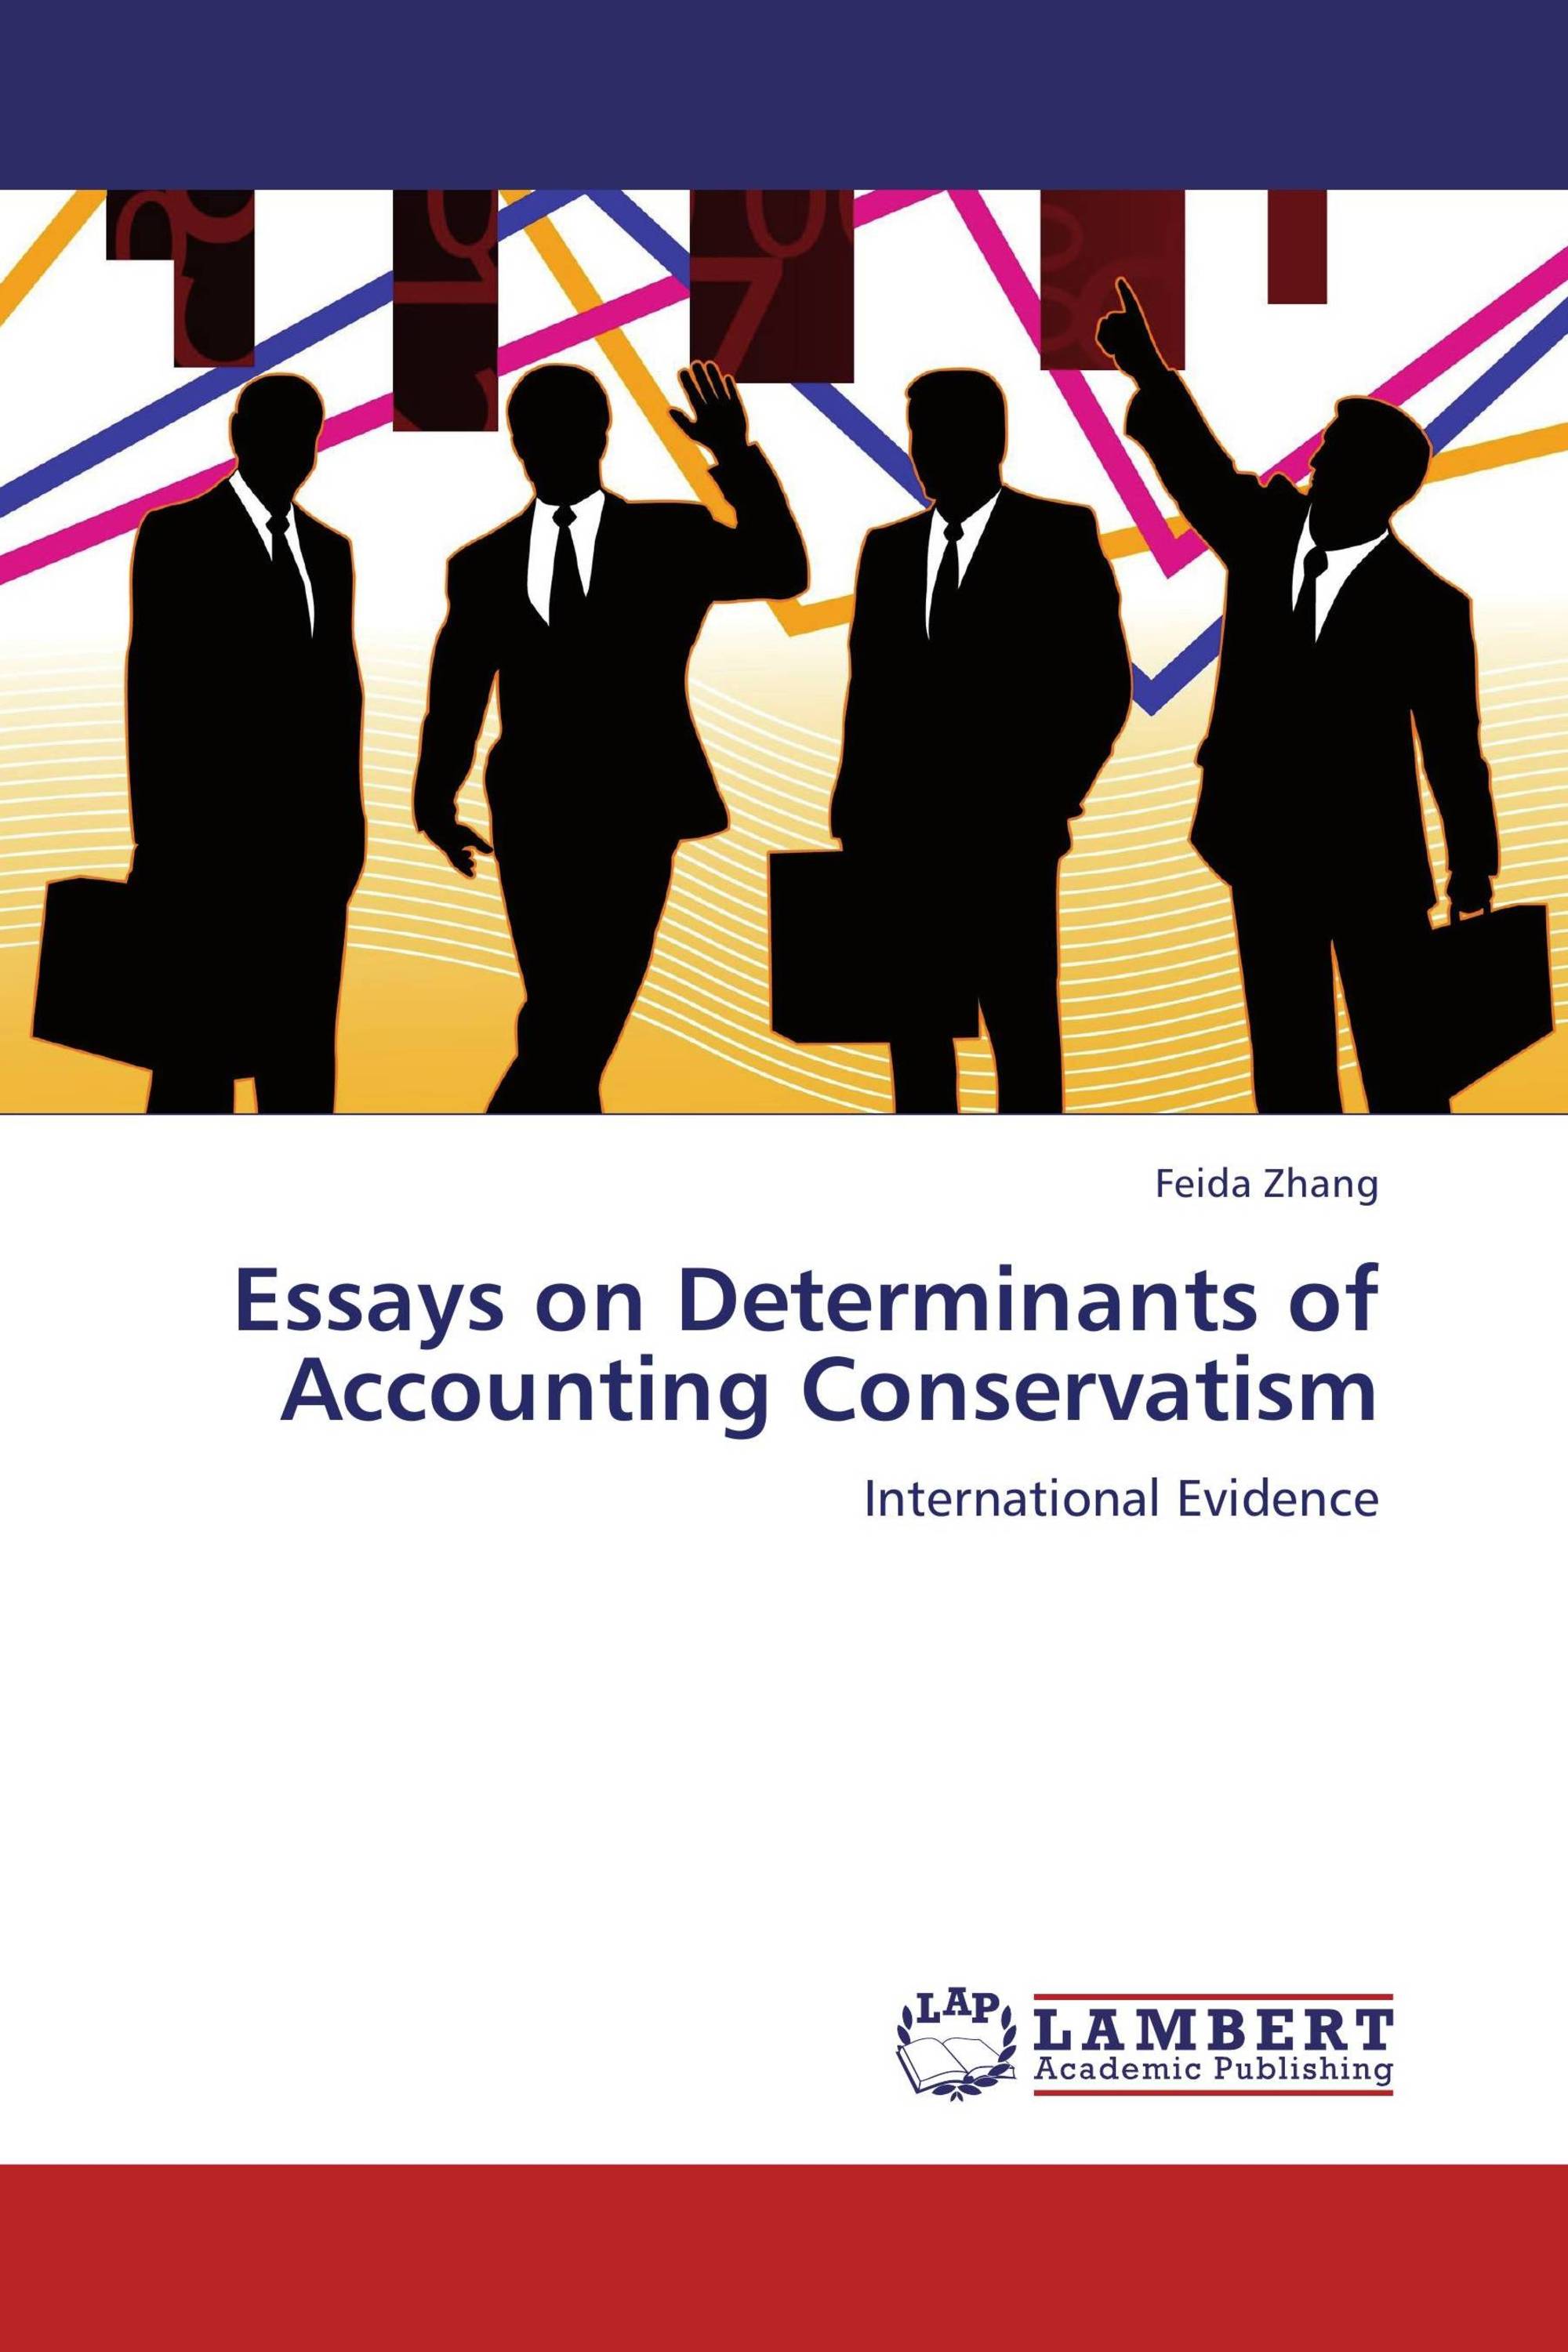 Essays on Determinants of Accounting Conservatism